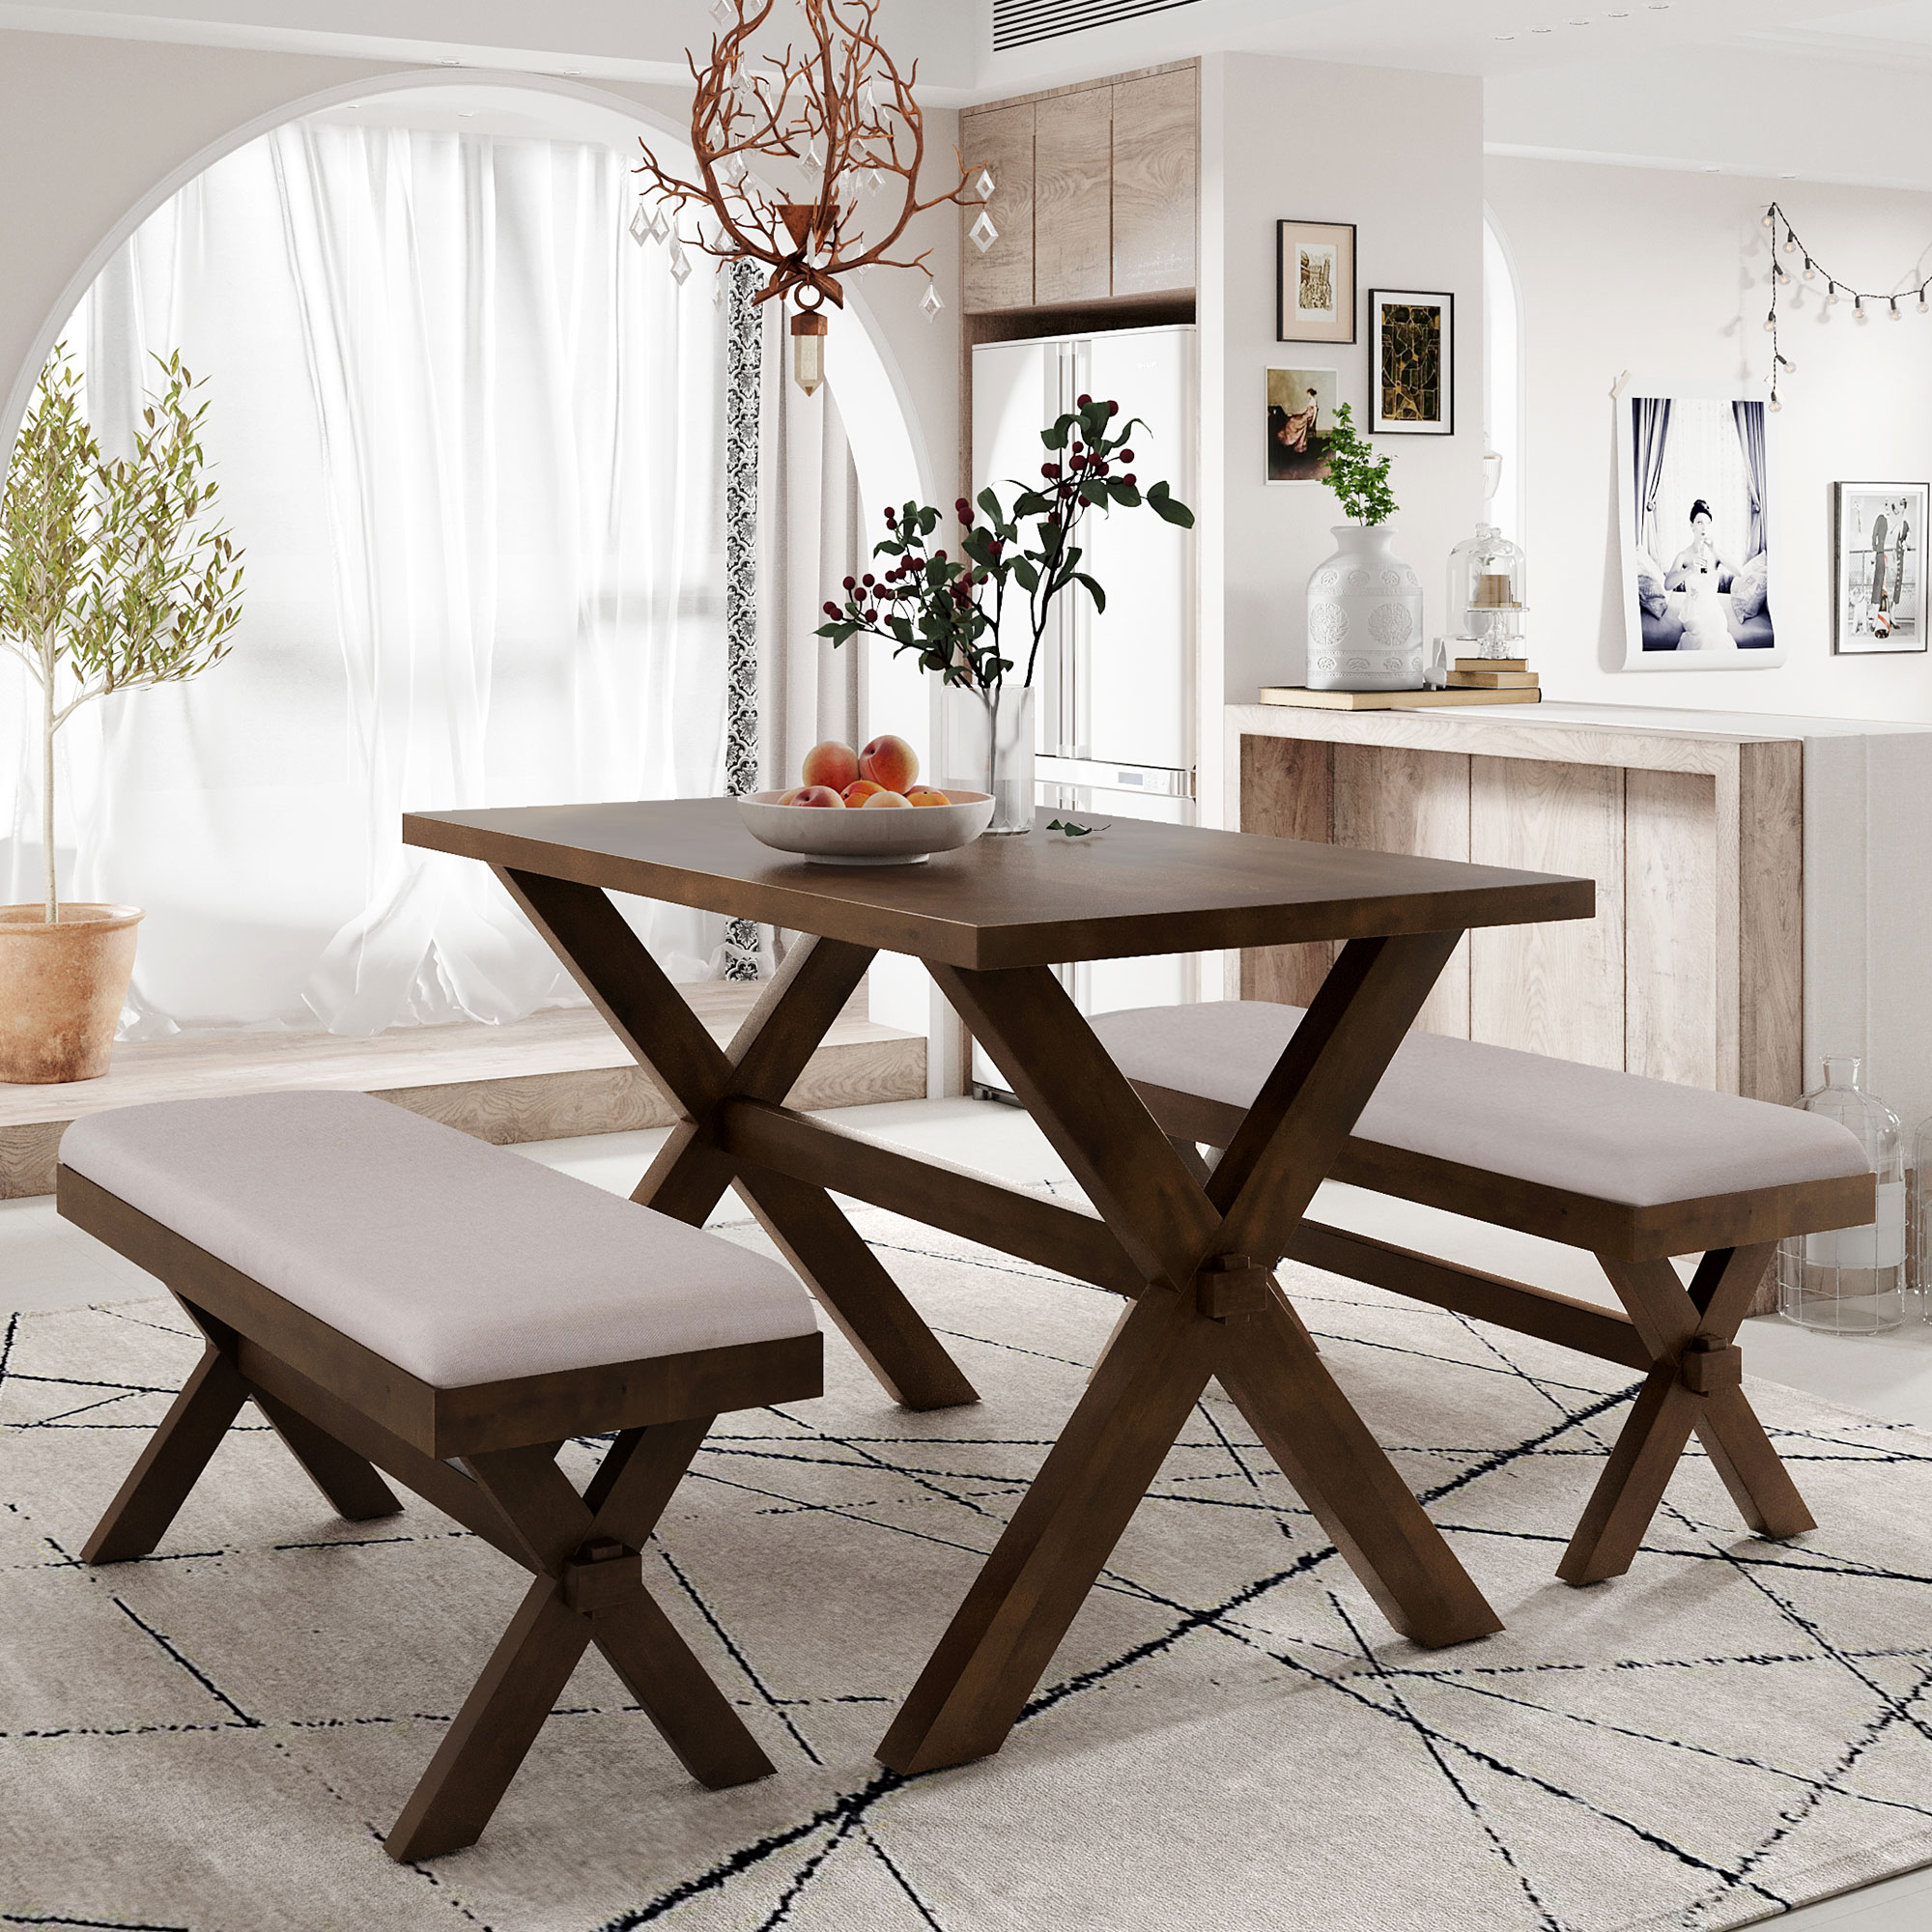 3 Pieces Farmhouse Rustic Wood Kitchen Dining Table Set - SH000166AAD